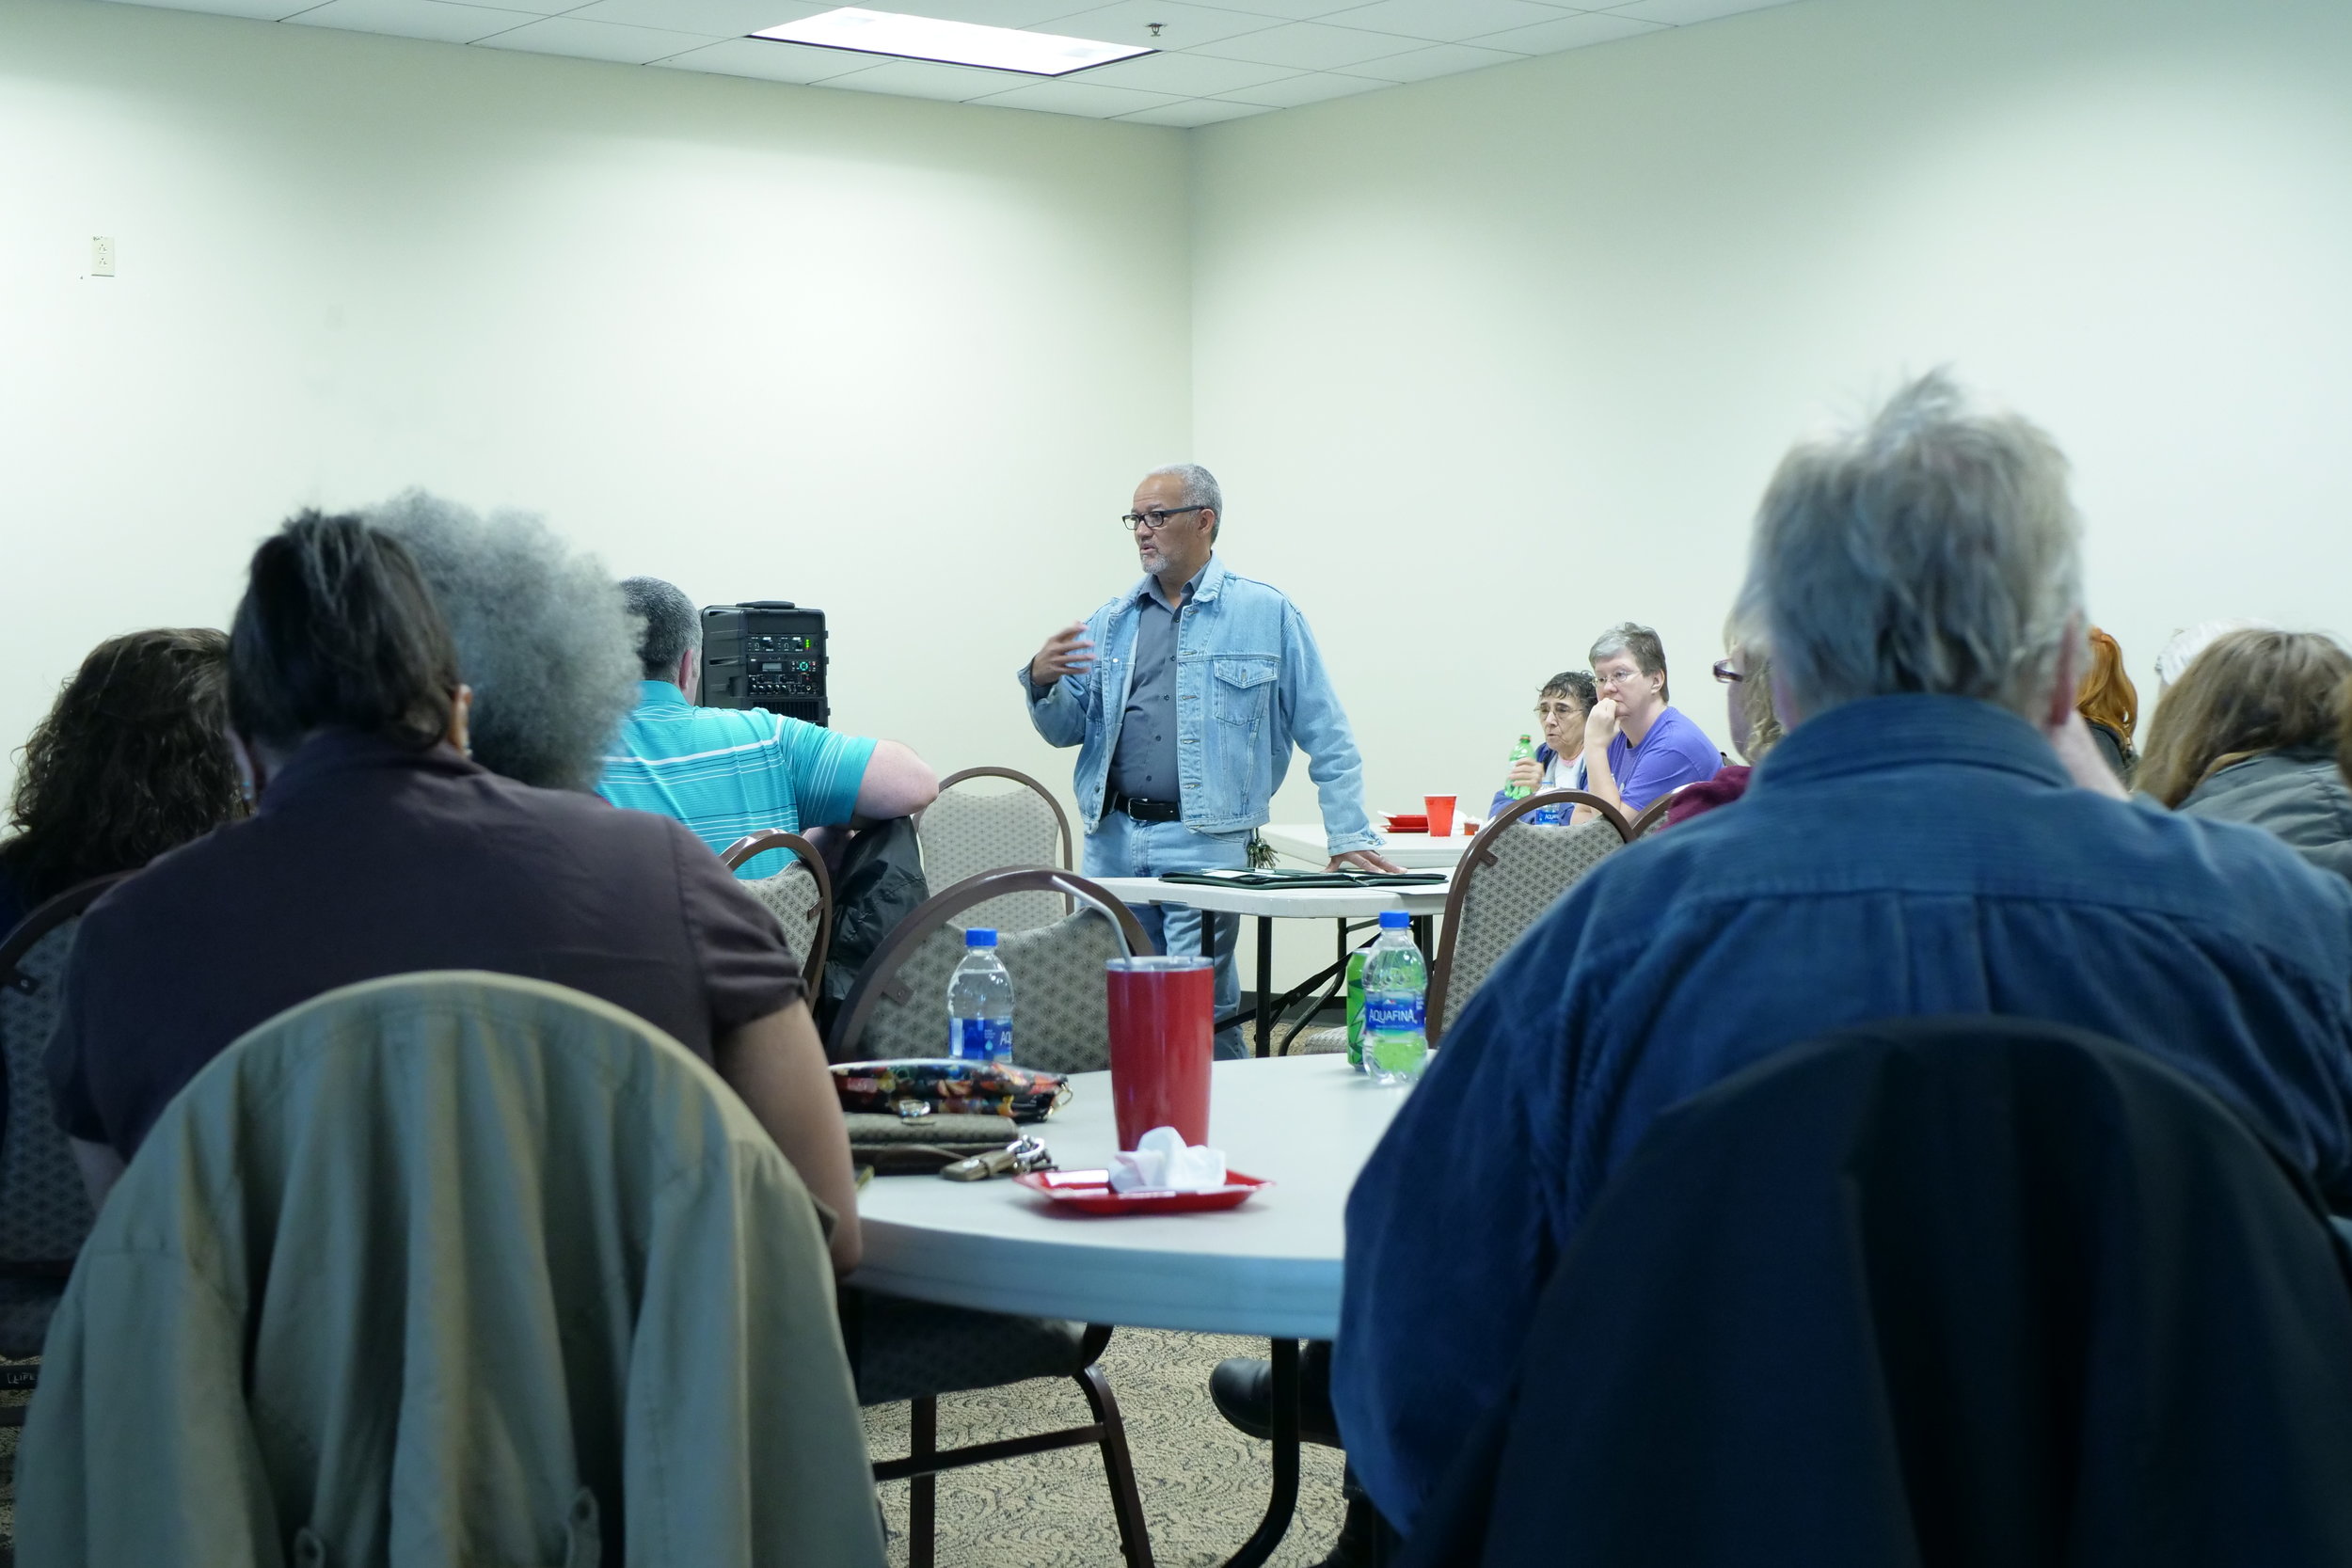 Wayne Riley, Director of the Laurel County African American Heritage Center, facilitates a discussion after the film. (Copy)